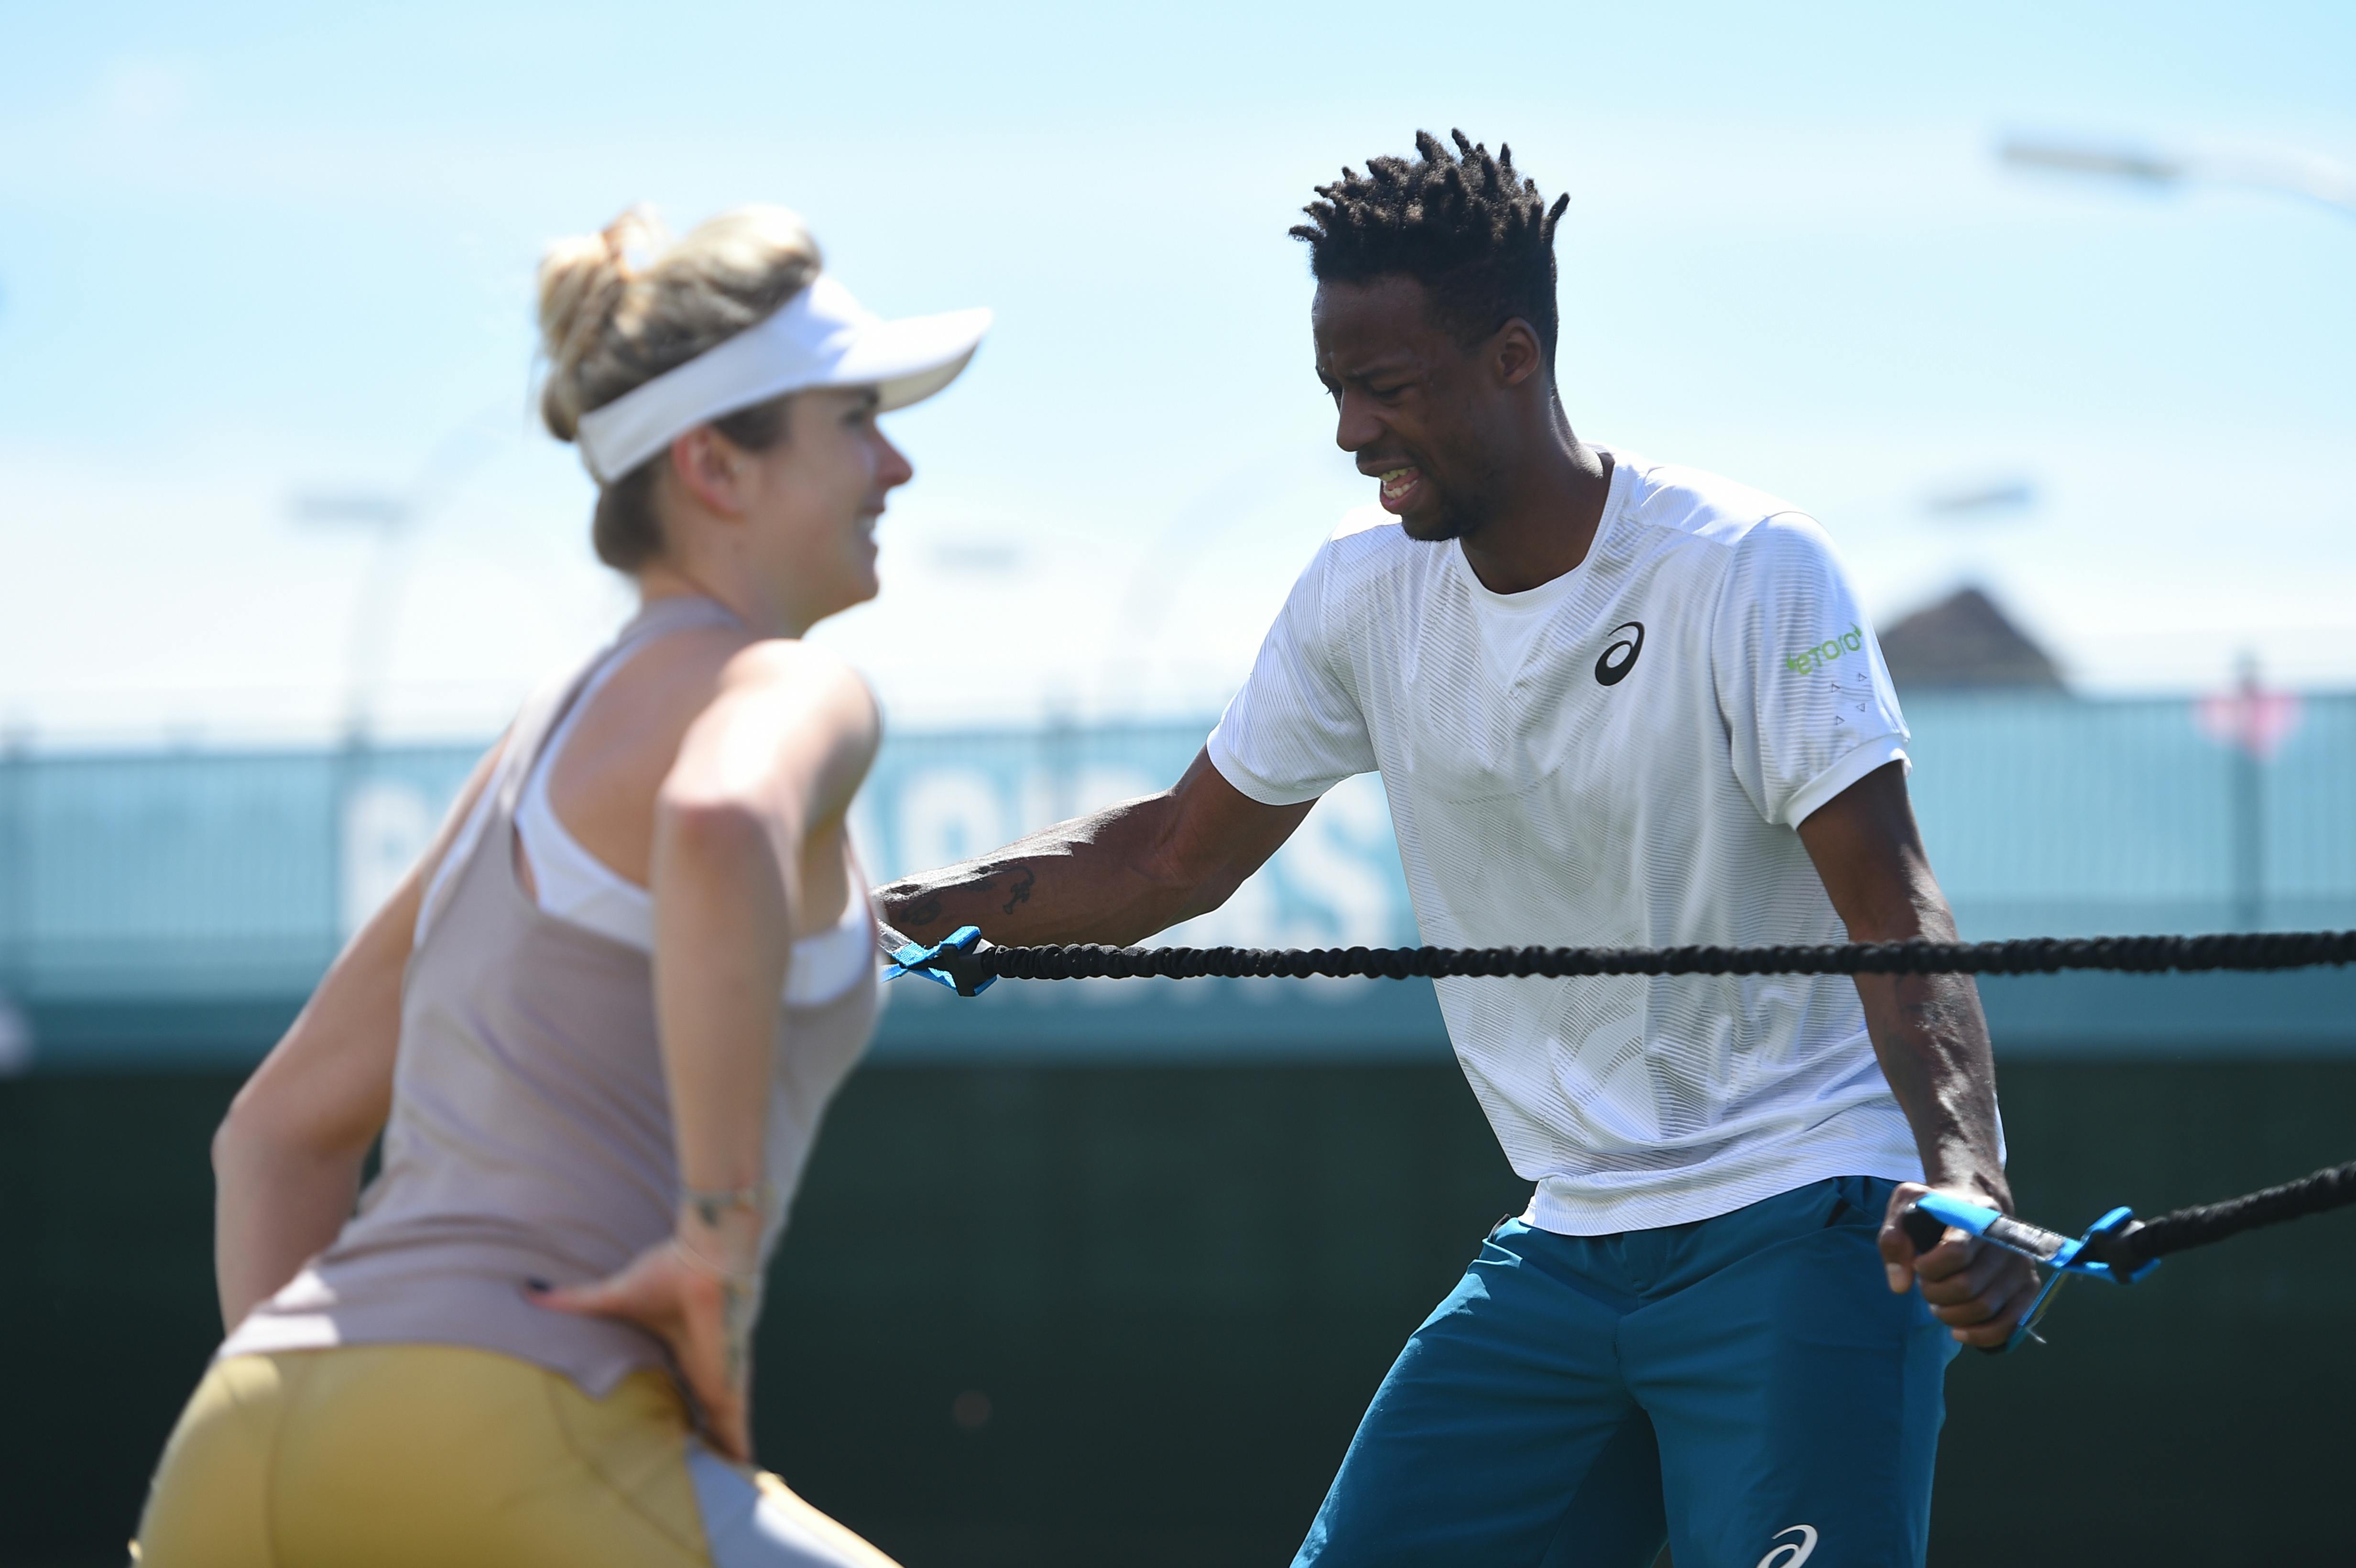 Love story between Elina and Gael.